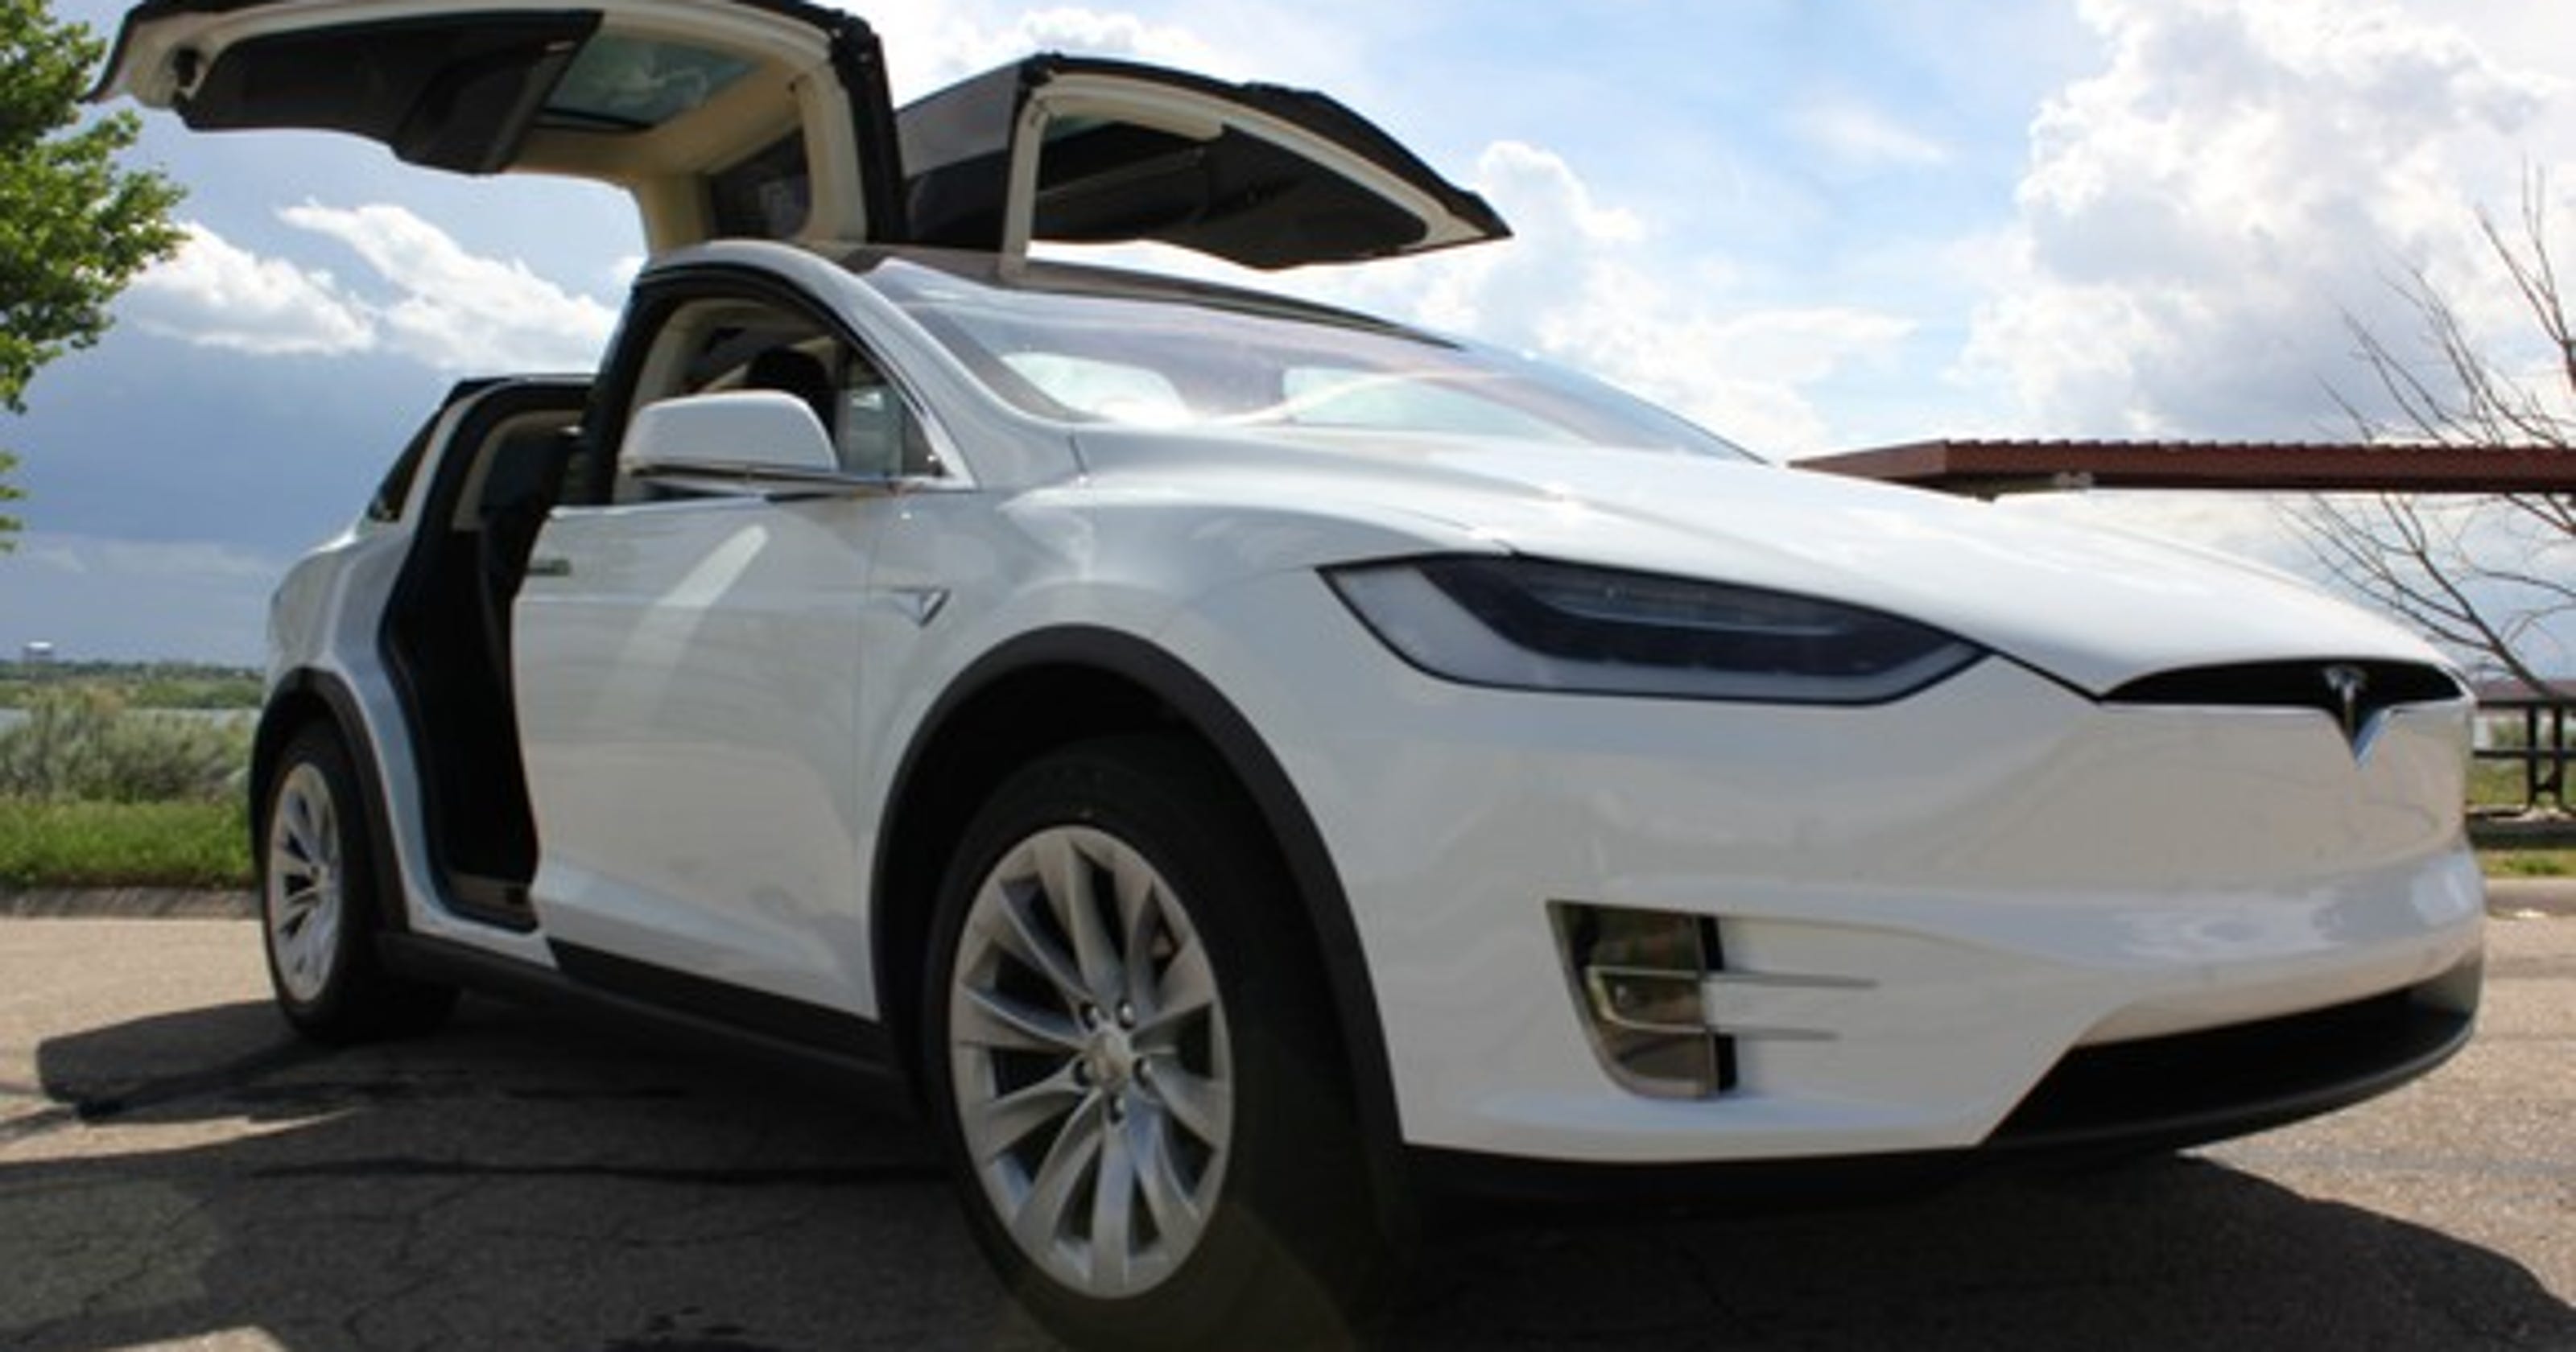 Tesla to offer cheaper Model X crossover3200 x 1680